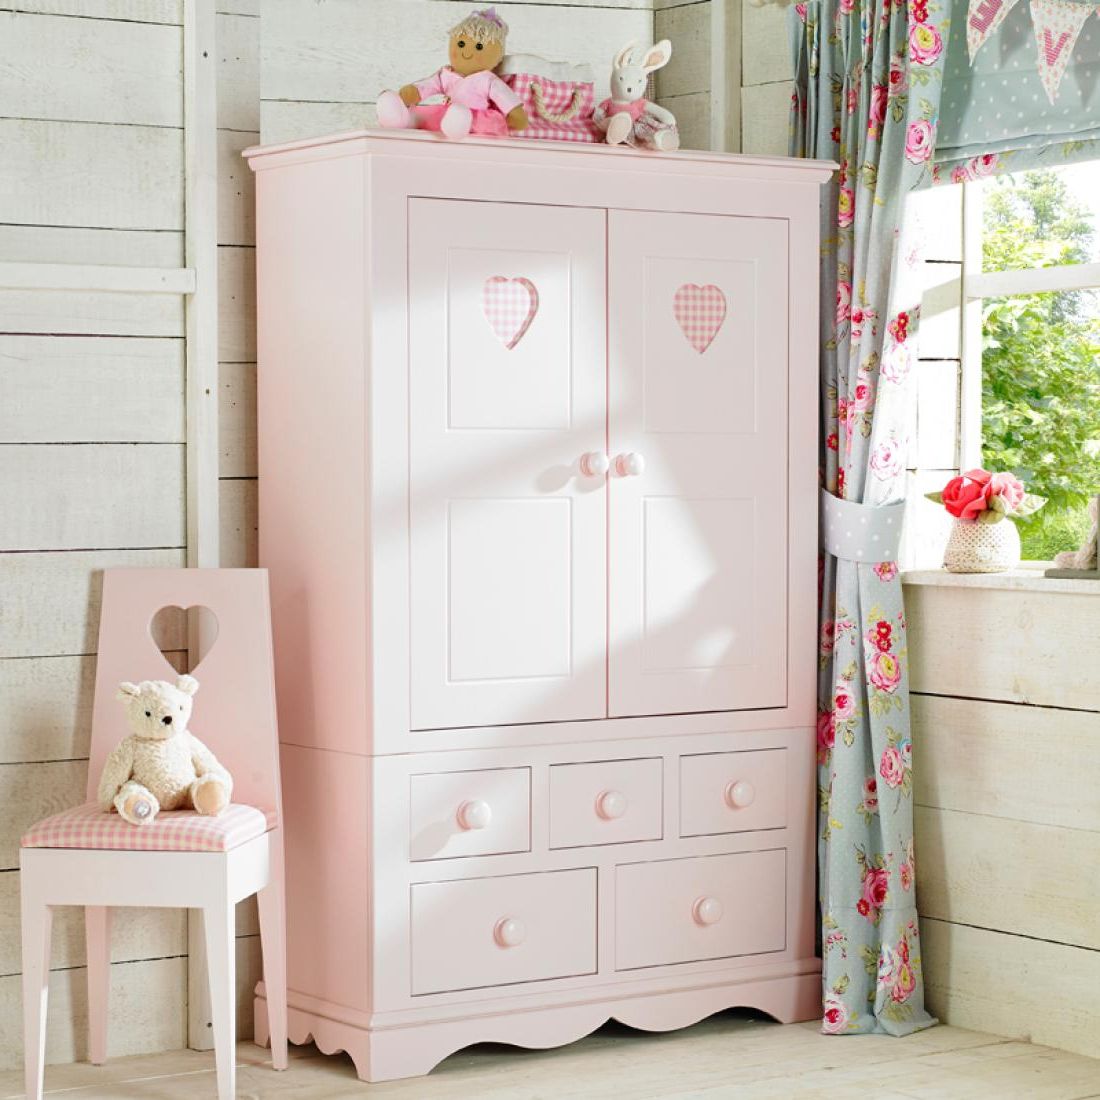 Looby Lou Combination Wardrobe | Childrens Wardrobe | Girls Wardrobe With Regard To Childrens Pink Wardrobes (Gallery 1 of 20)